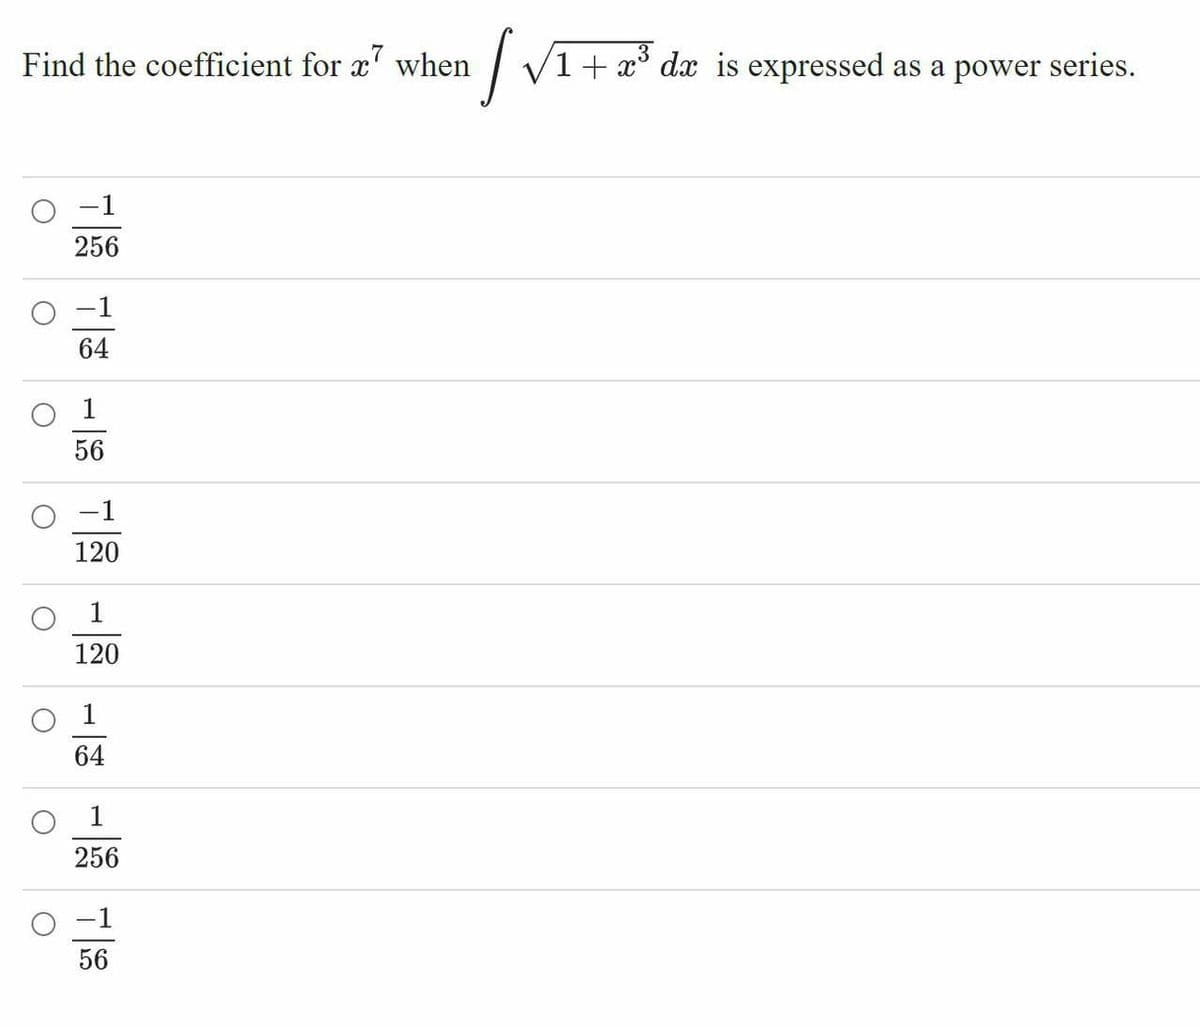 Find the coefficient for a' when
I V1+ x° dx is expressed as a power series.
-1
256
-1
64
56
-1
120
1
120
1
64
O 1
256
-1
56
